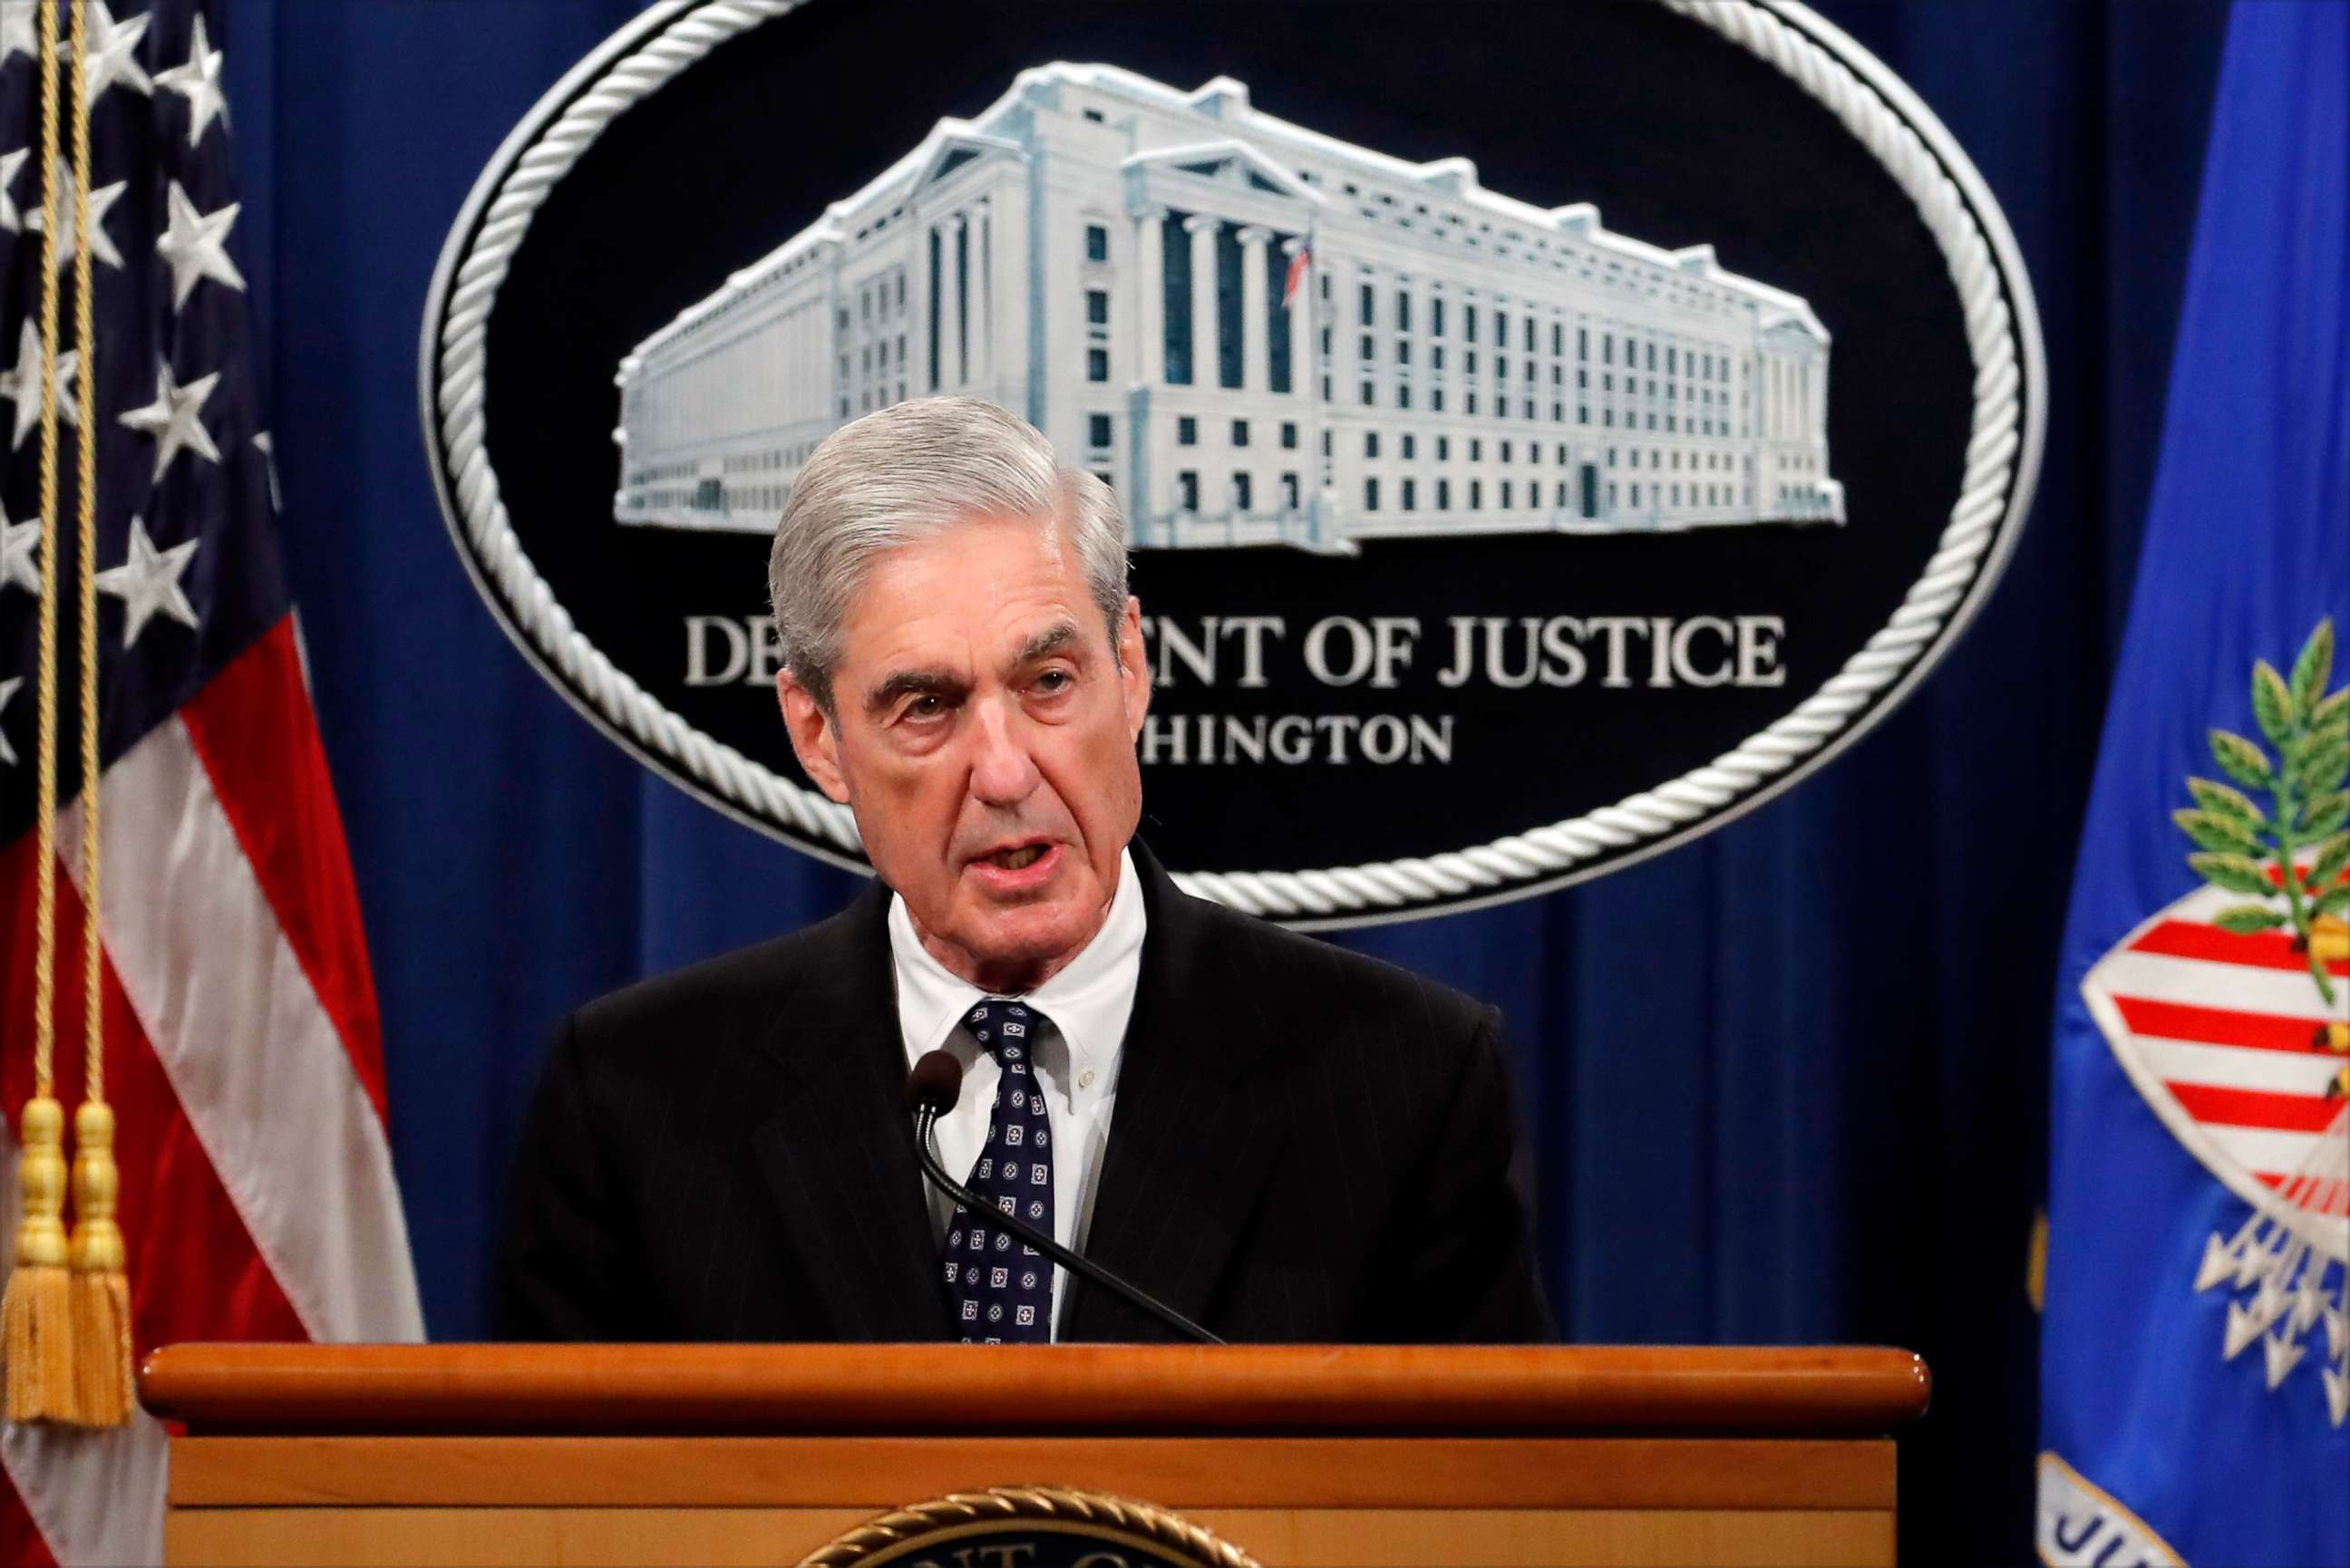 PHOTO: This May 29, 2019 file photo shows special counsel Robert Mueller speaking about the Russia investigation at the Department of Justice in Washington.